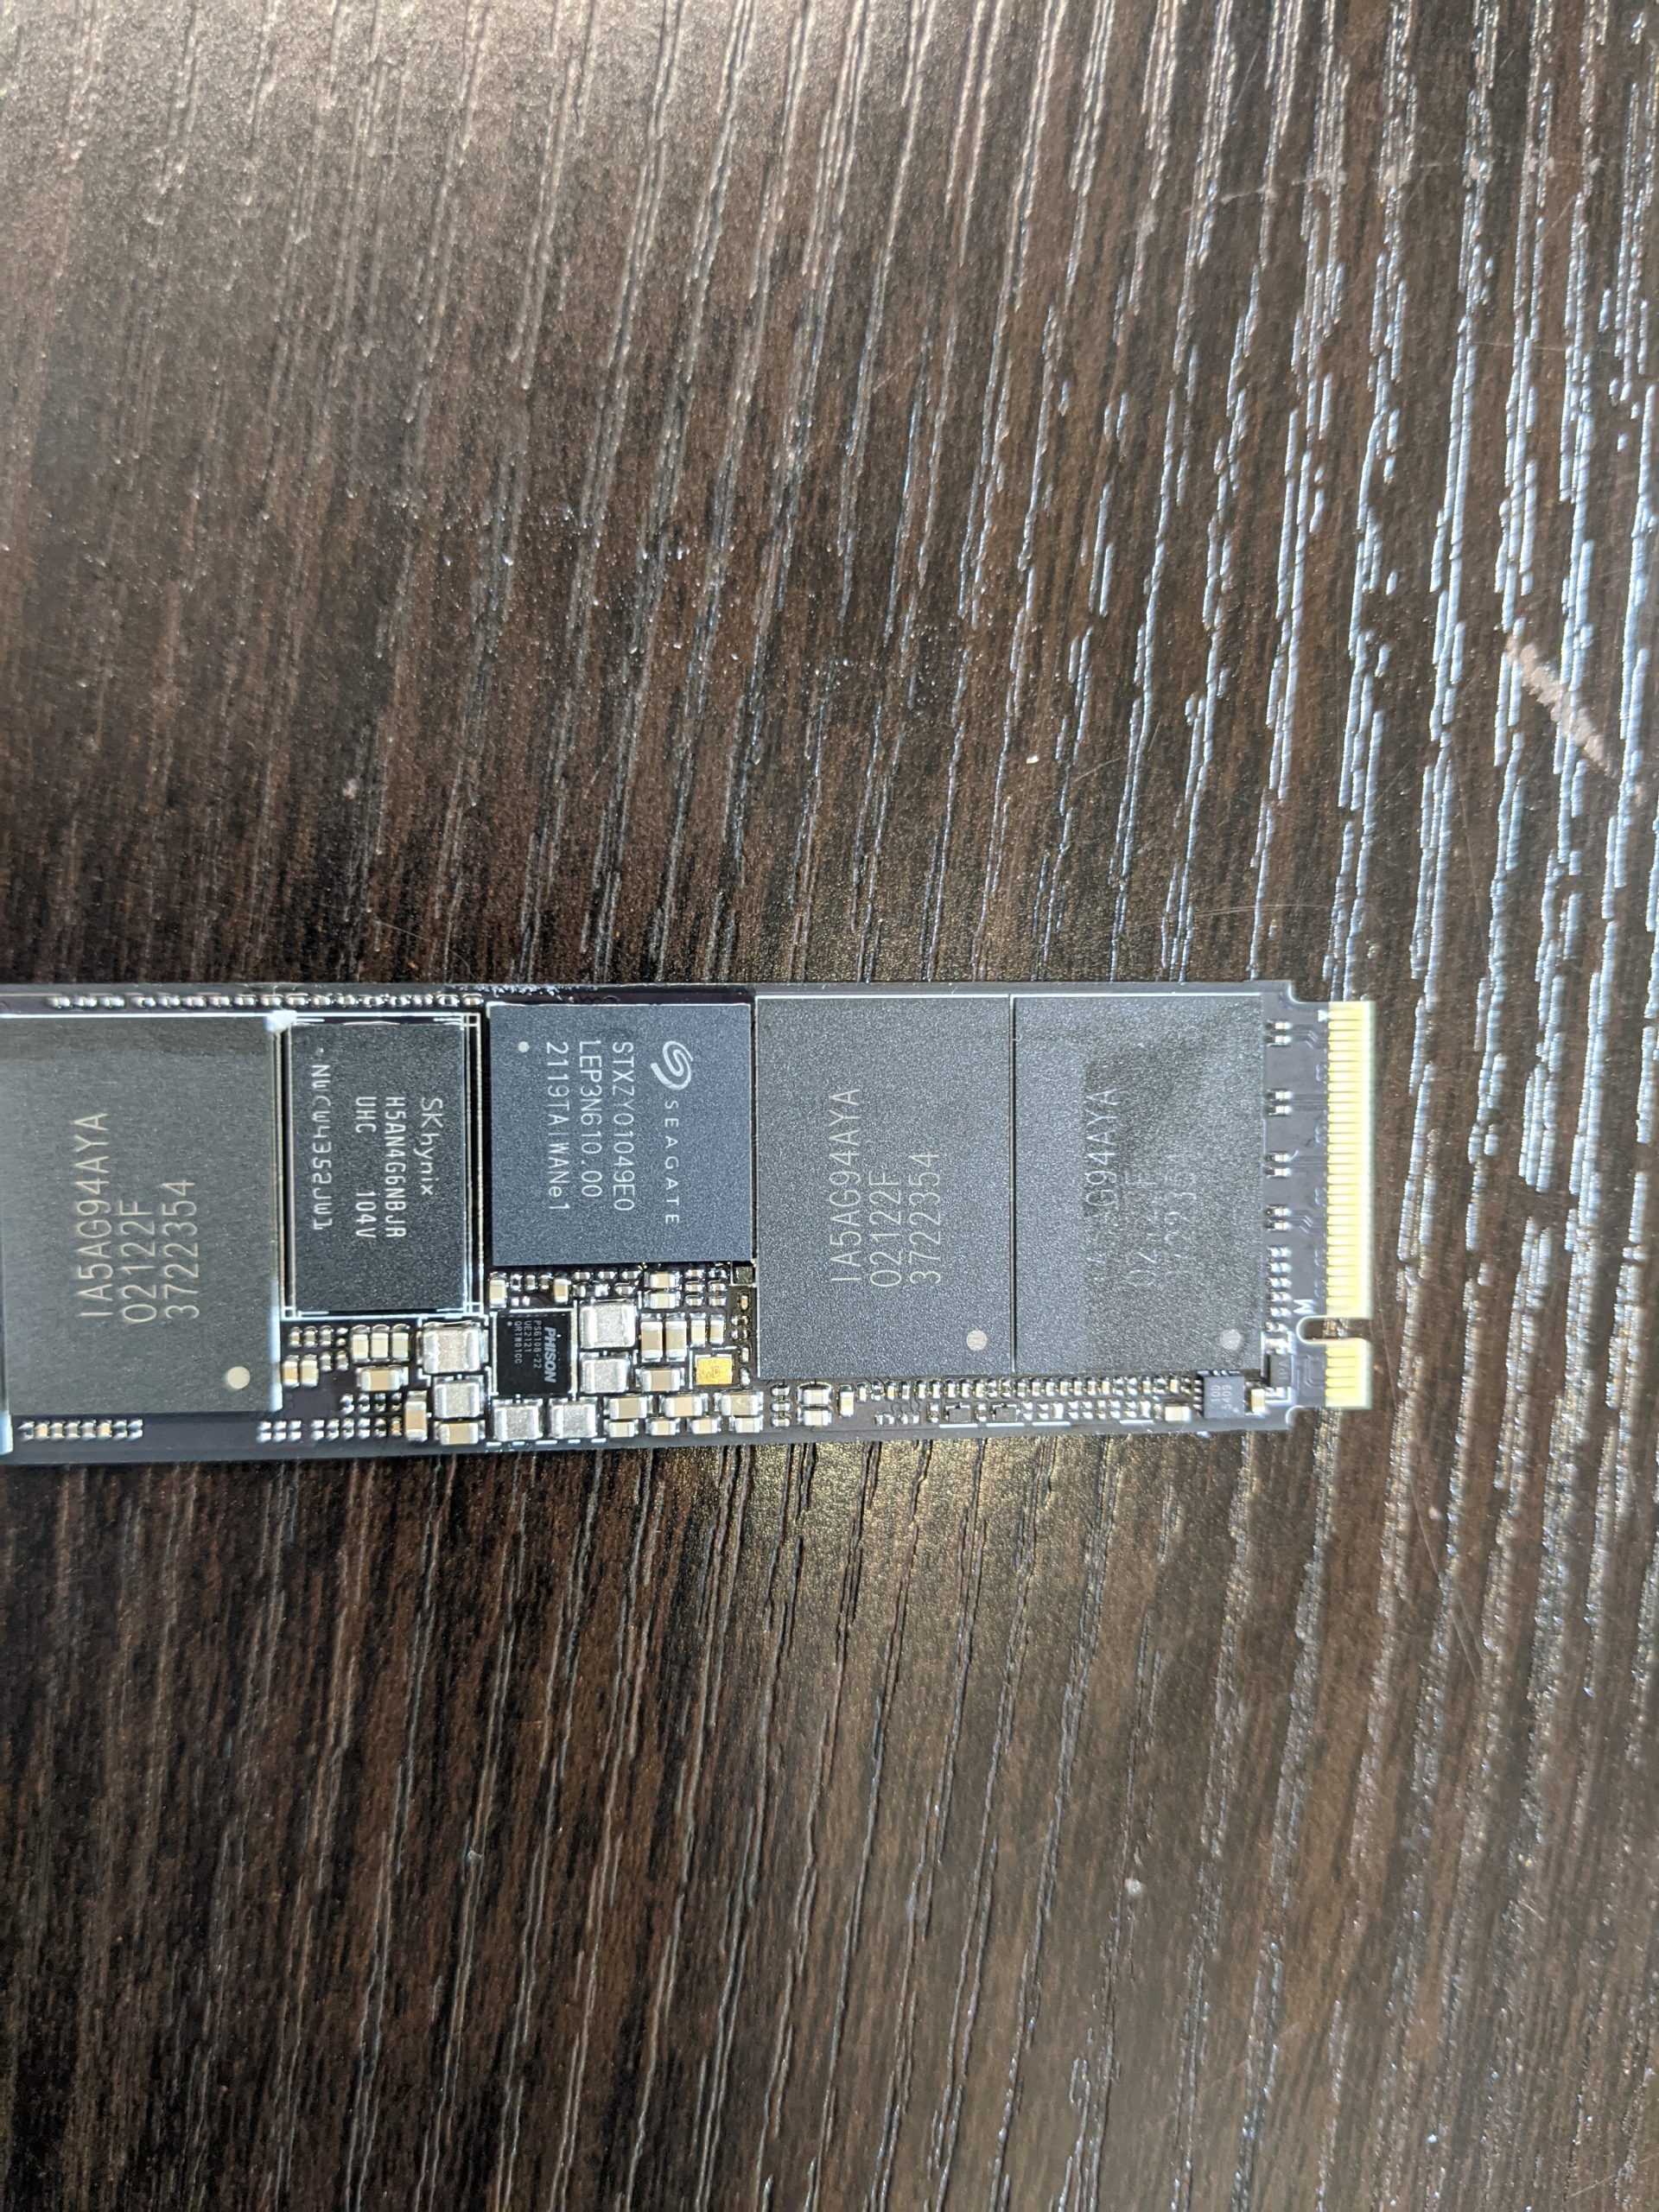 Seagate FireCuda 530 1TB NVMe SSD Review Sustained Write King